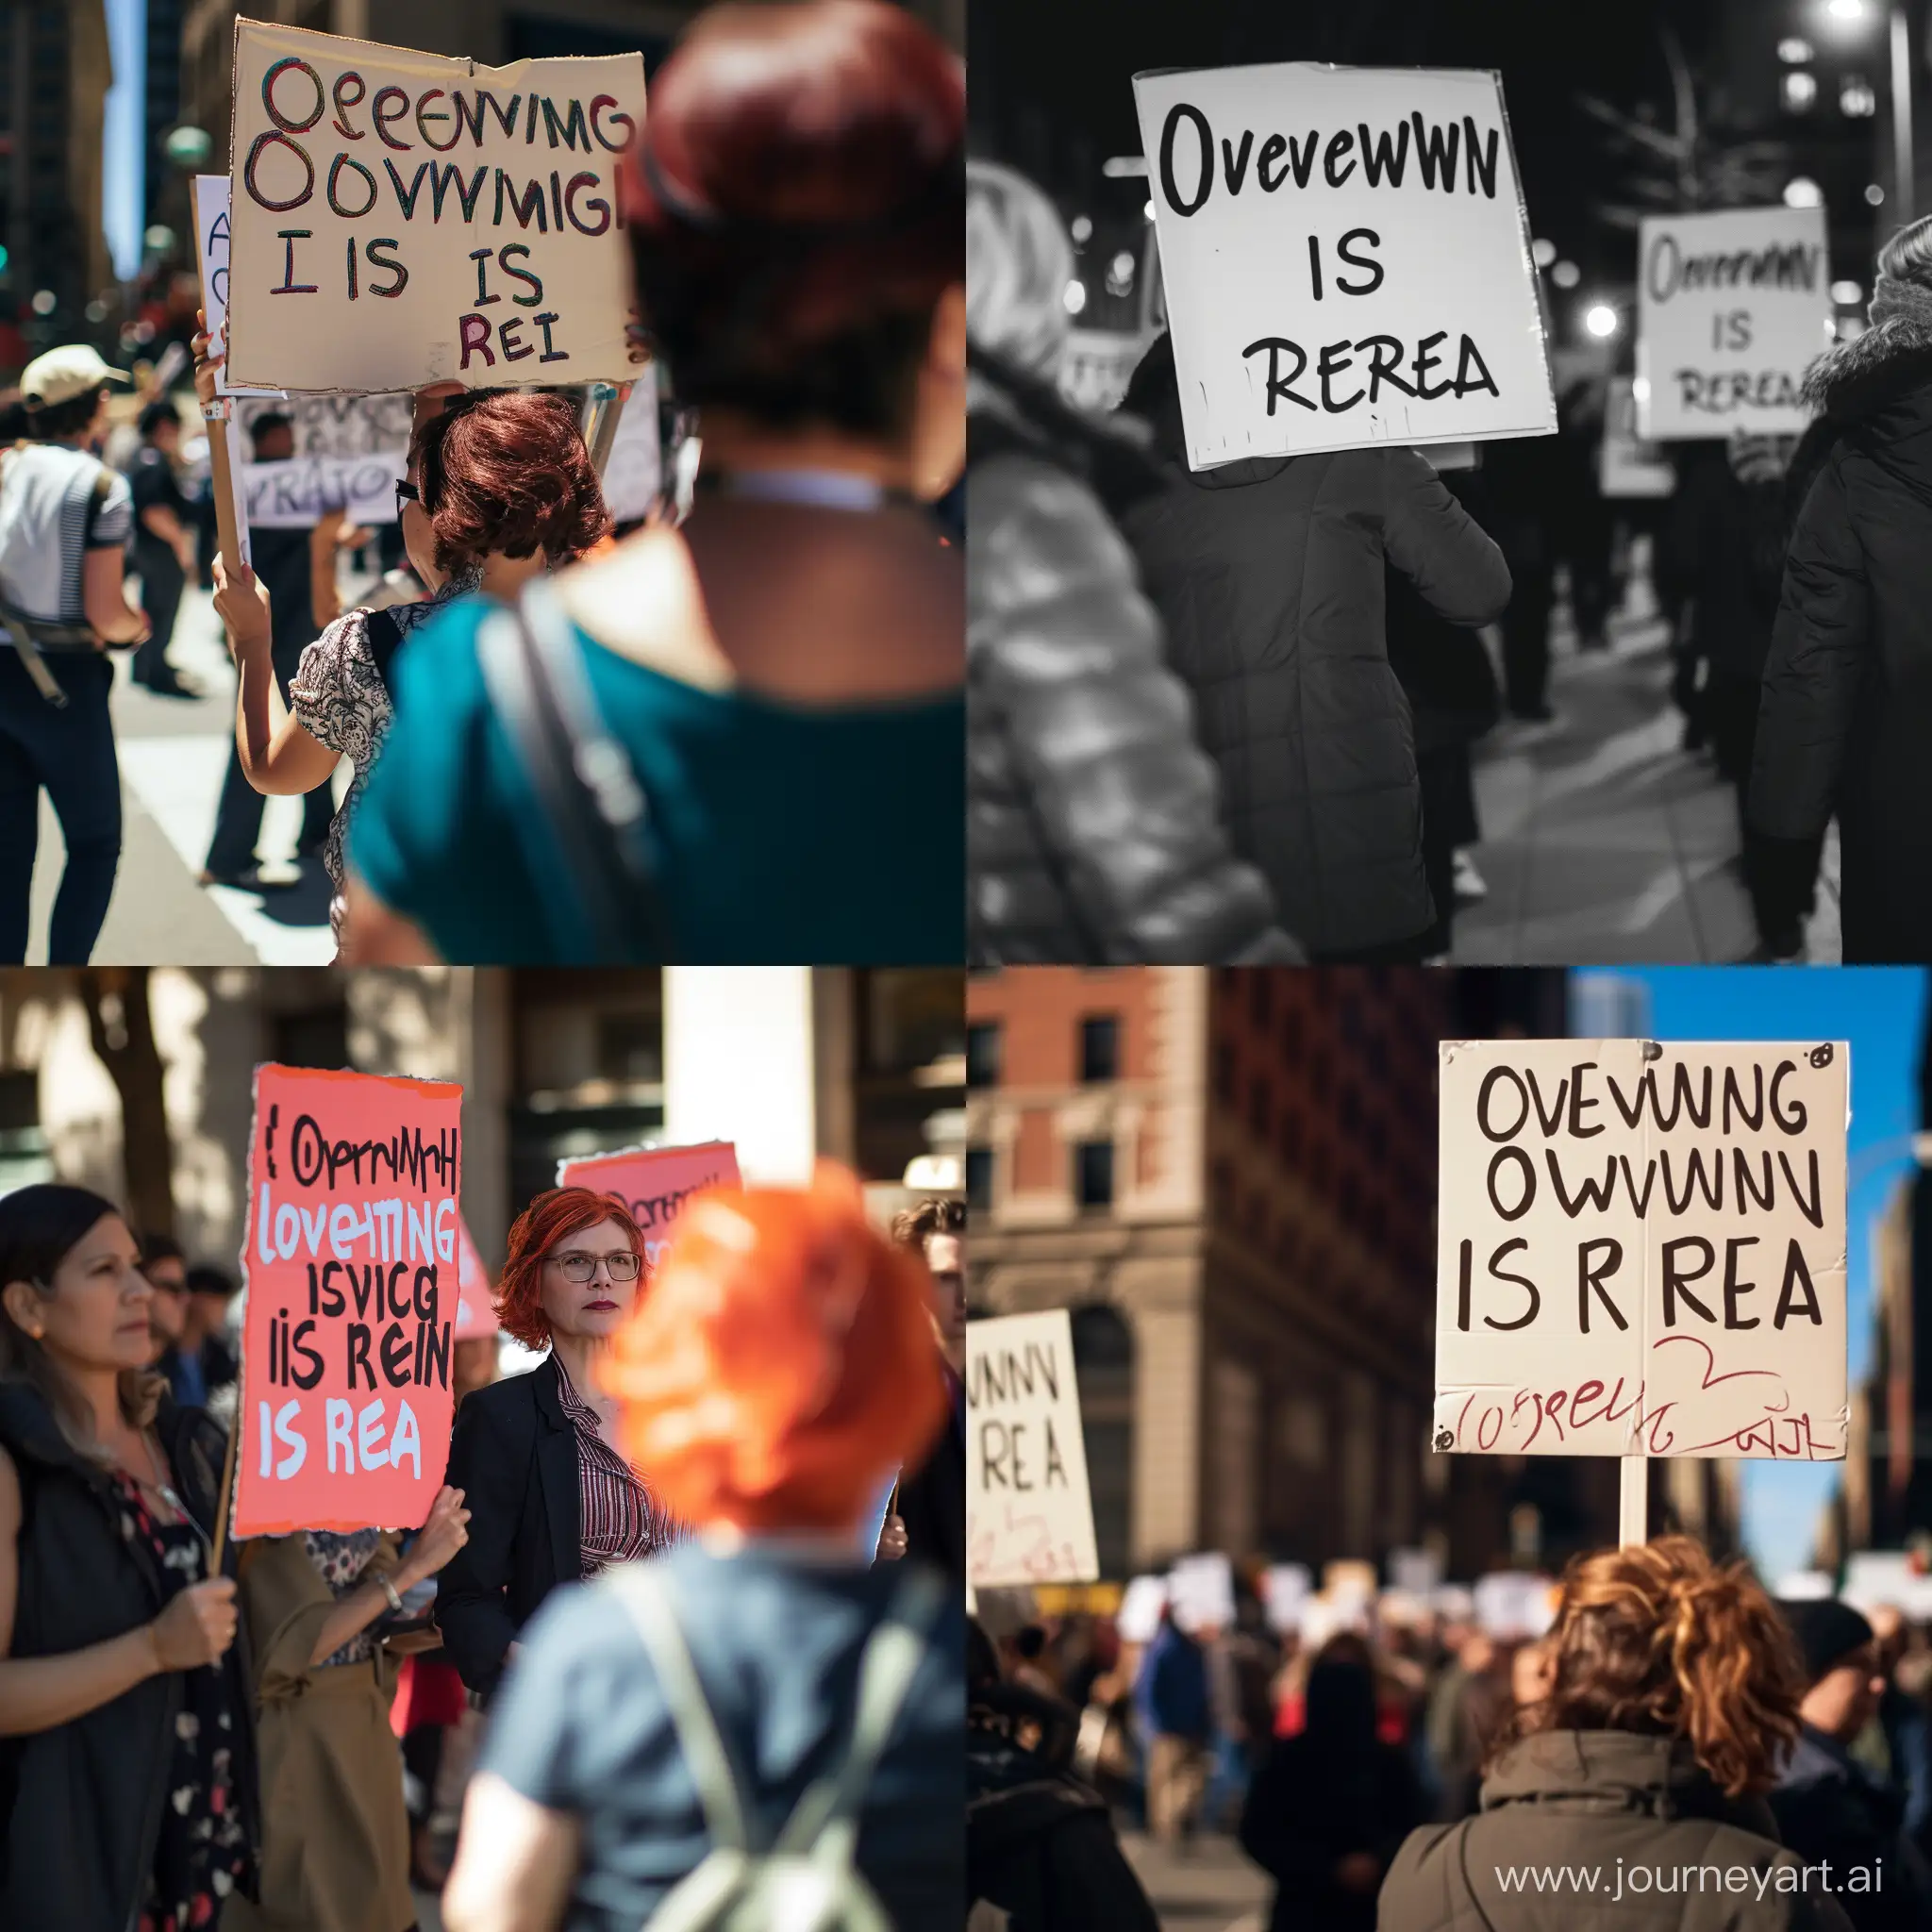 Protesters-Advocating-Against-Overworking-with-Placards